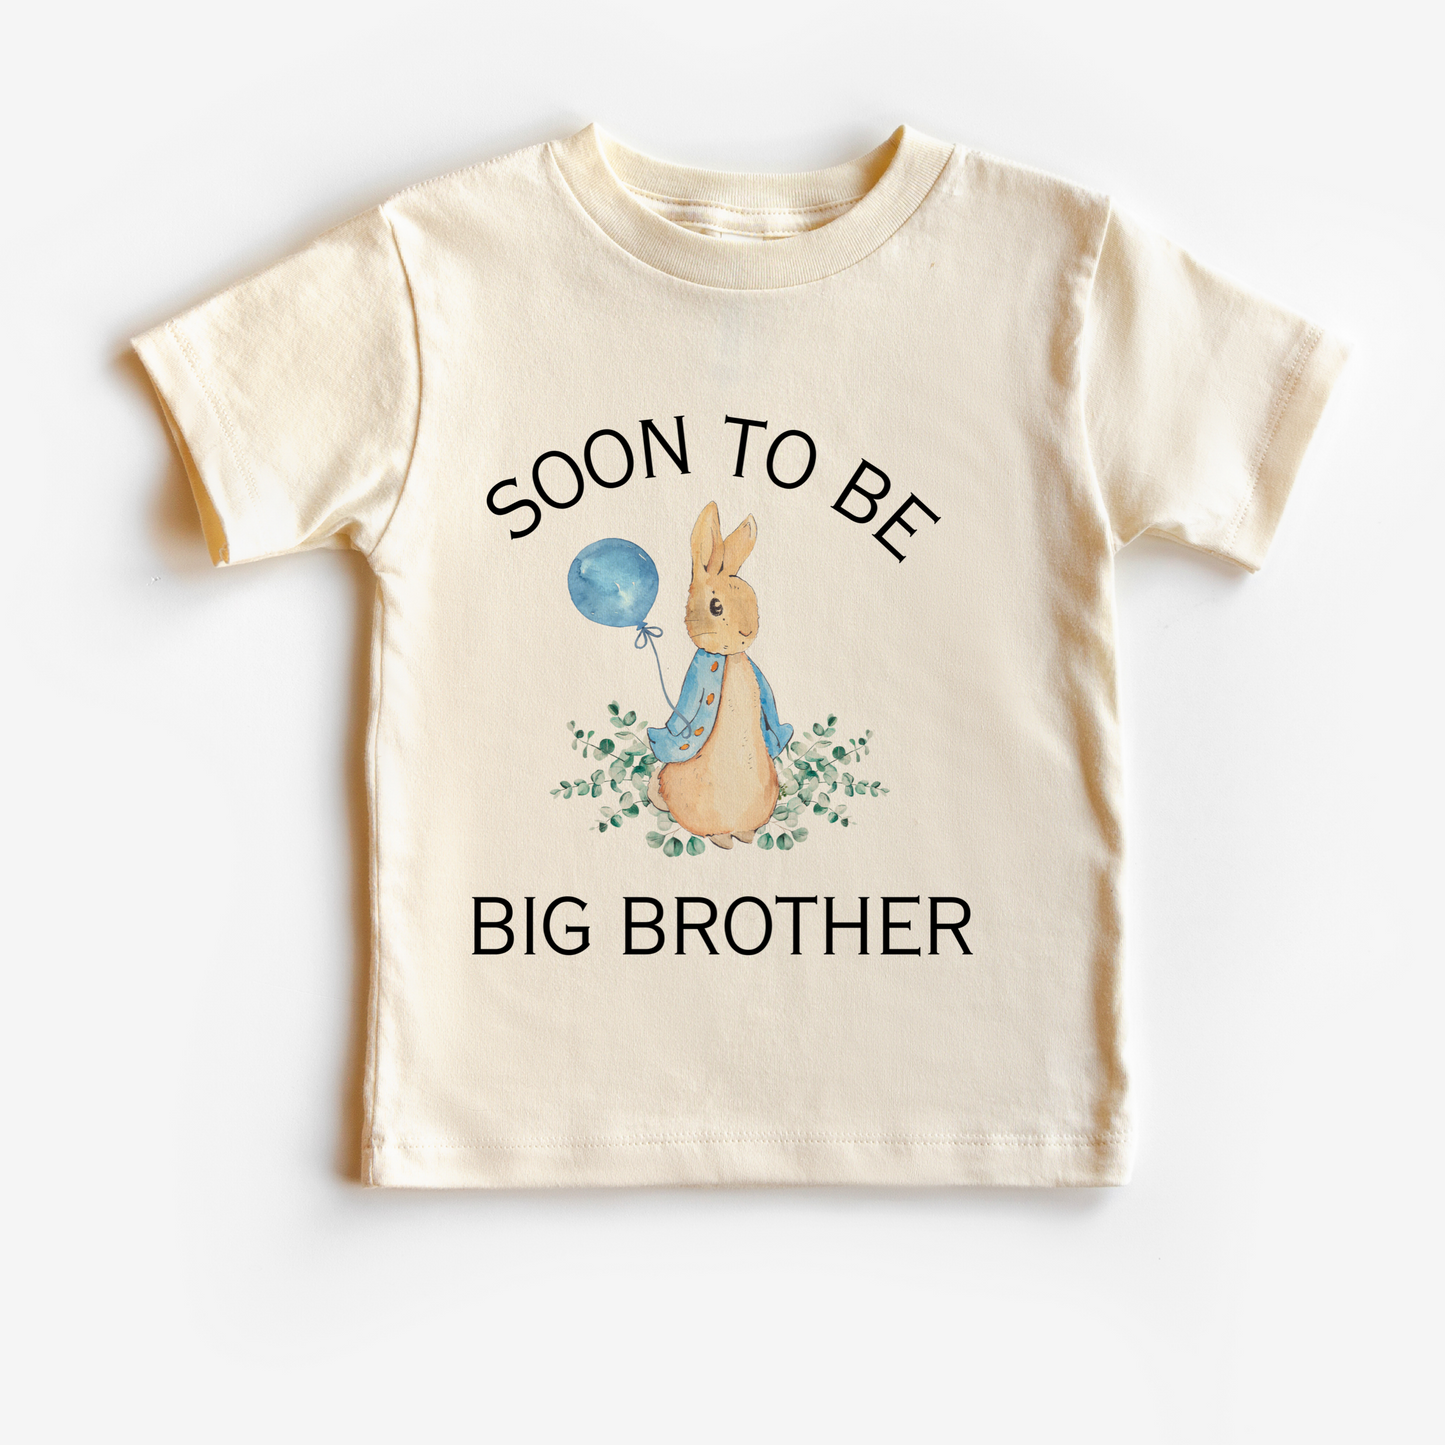 Soon to be Big Brother Peter Rabbit T shirt